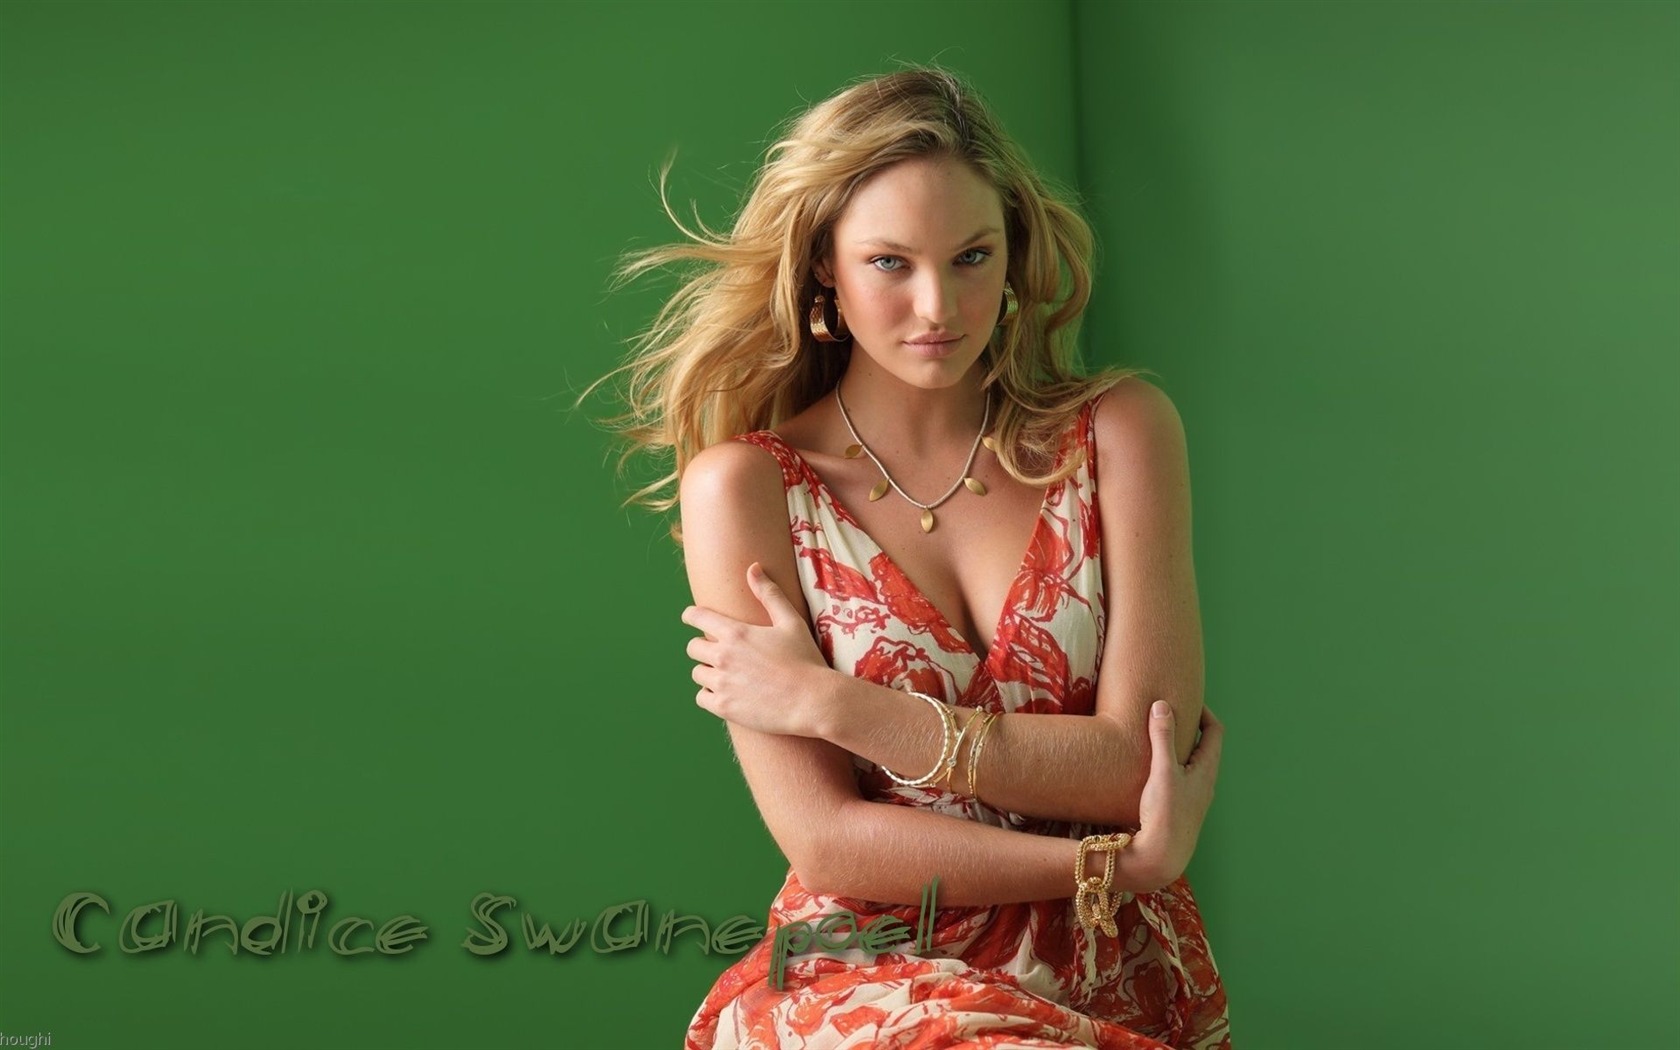 Candice Swanepoel #016 - 1680x1050 Wallpapers Pictures Photos Images